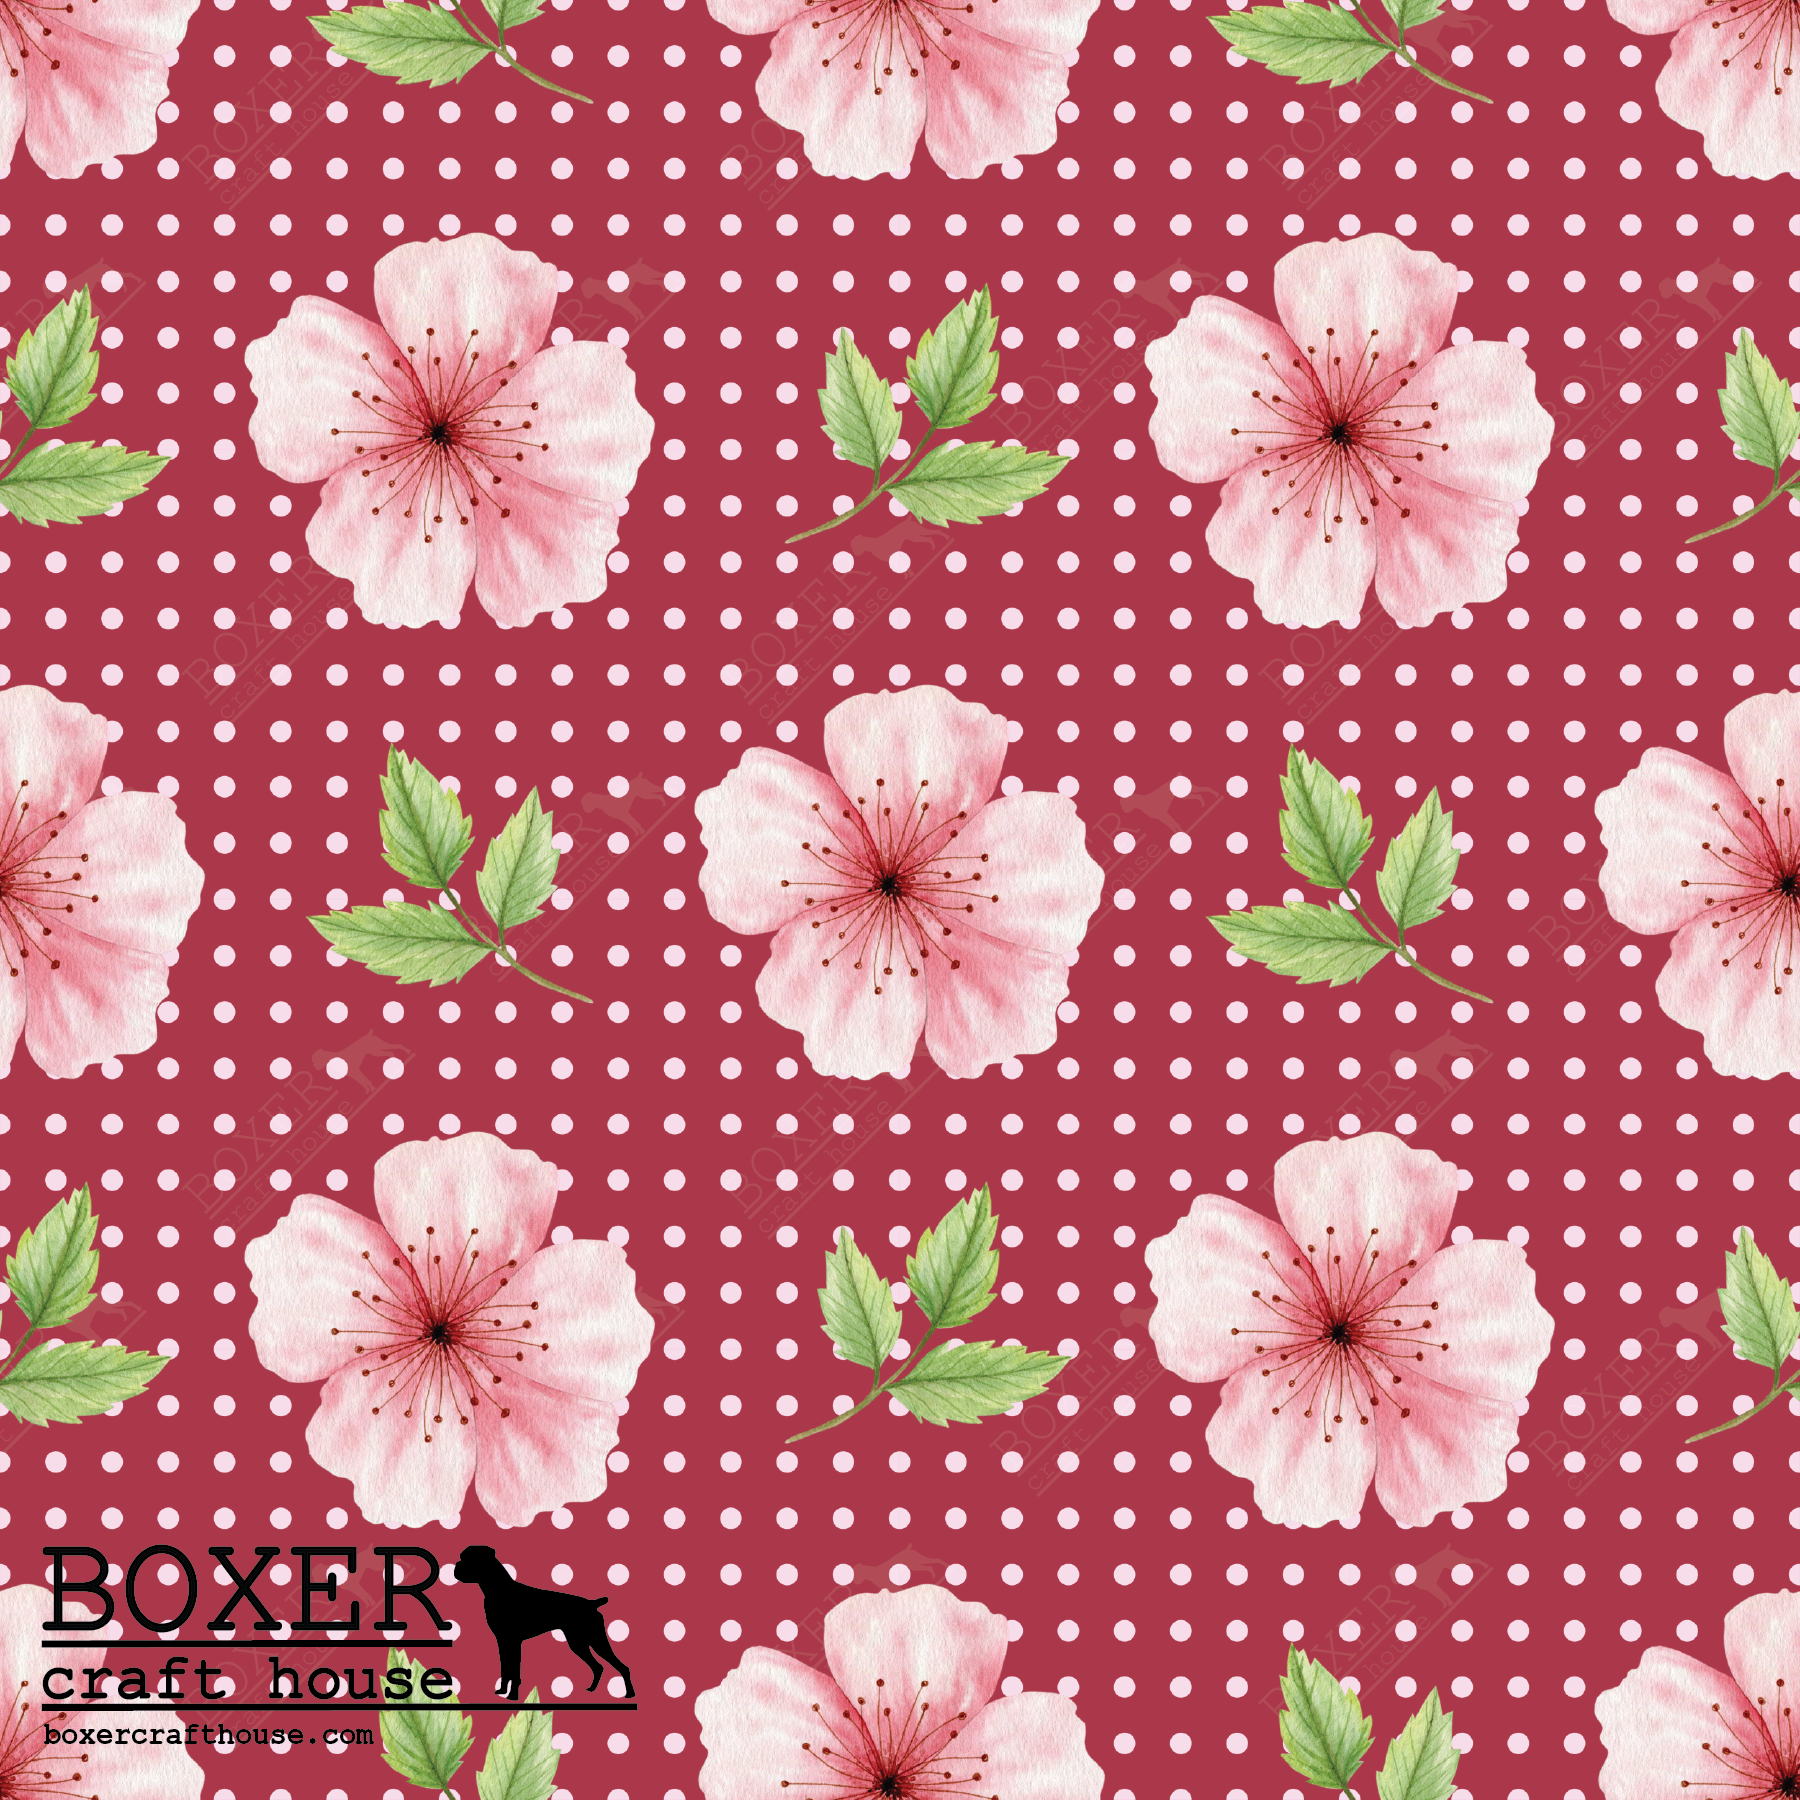 Cherry Blossom Faux Leather, Embroidery Vinyl, Sewing Faux Leather, Bag Making Supplies, Faux Leather For Embroidery, Quality Faux Leather, Embroidery Supplies, Sewing Supplies, Woman Owned Business, Craft Supply Store, USA, In the Hoop Supplies, Sewing with vinyl,Specialty Vinyl, Printed in the USA Faux Leather,Cherry Blossoms, Flowers, Cherry Blossom Embroidery Vinyl, Cherry Blossom Faux Leather